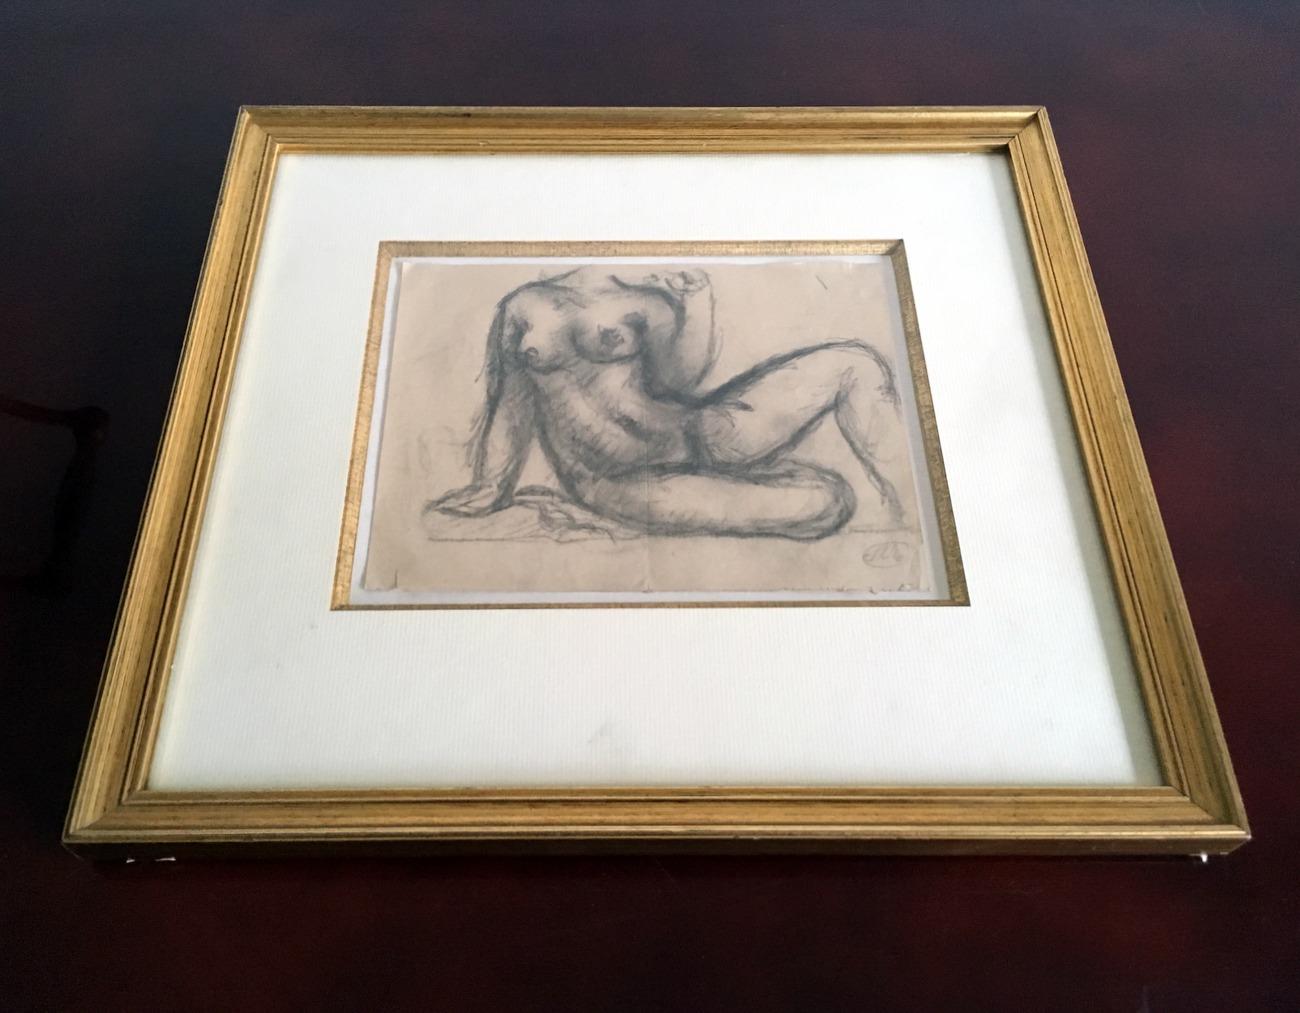 Pencil sketch by Aristide Maillol
(French 1861-1944)
Study for 'La Mediterranee'
Executed, circa 1902-1903.